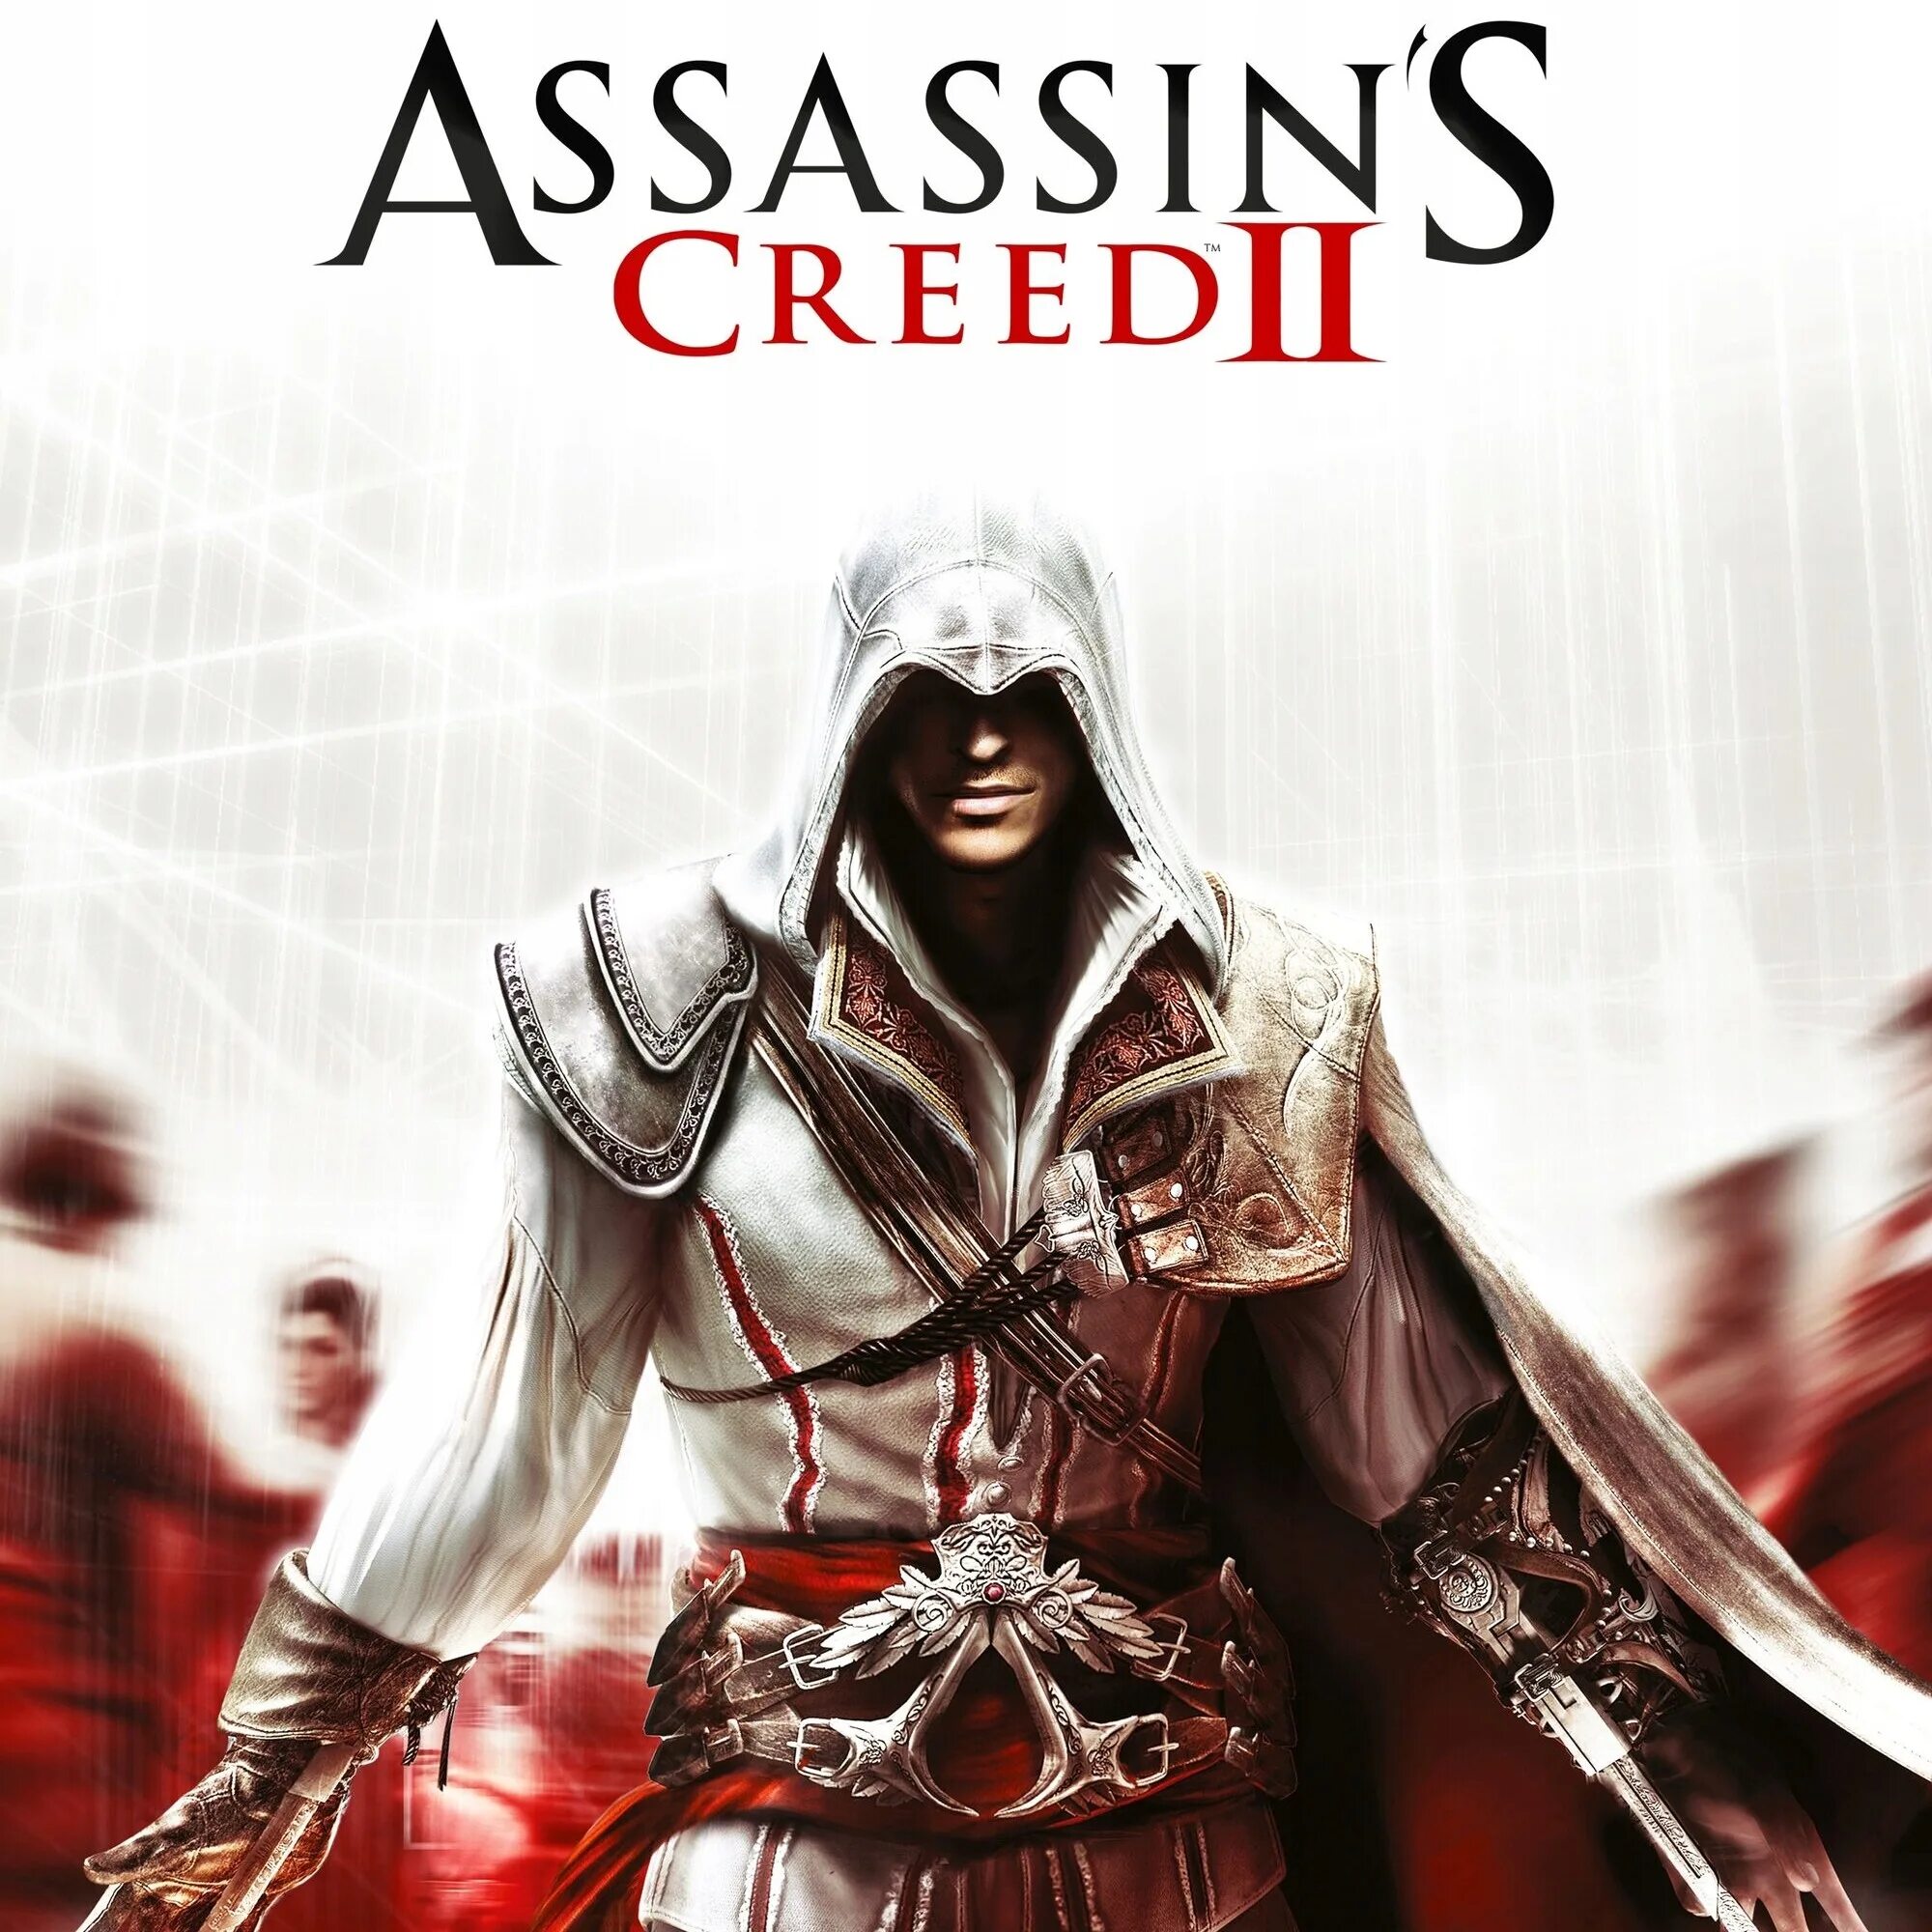 Games assassin creed 2. Ассасин Крид 2. Assassin's Creed 2 (II) (ps3). Assassin's Creed 2 Xbox 360. Ассасин Крид 2 иксбокс 360.